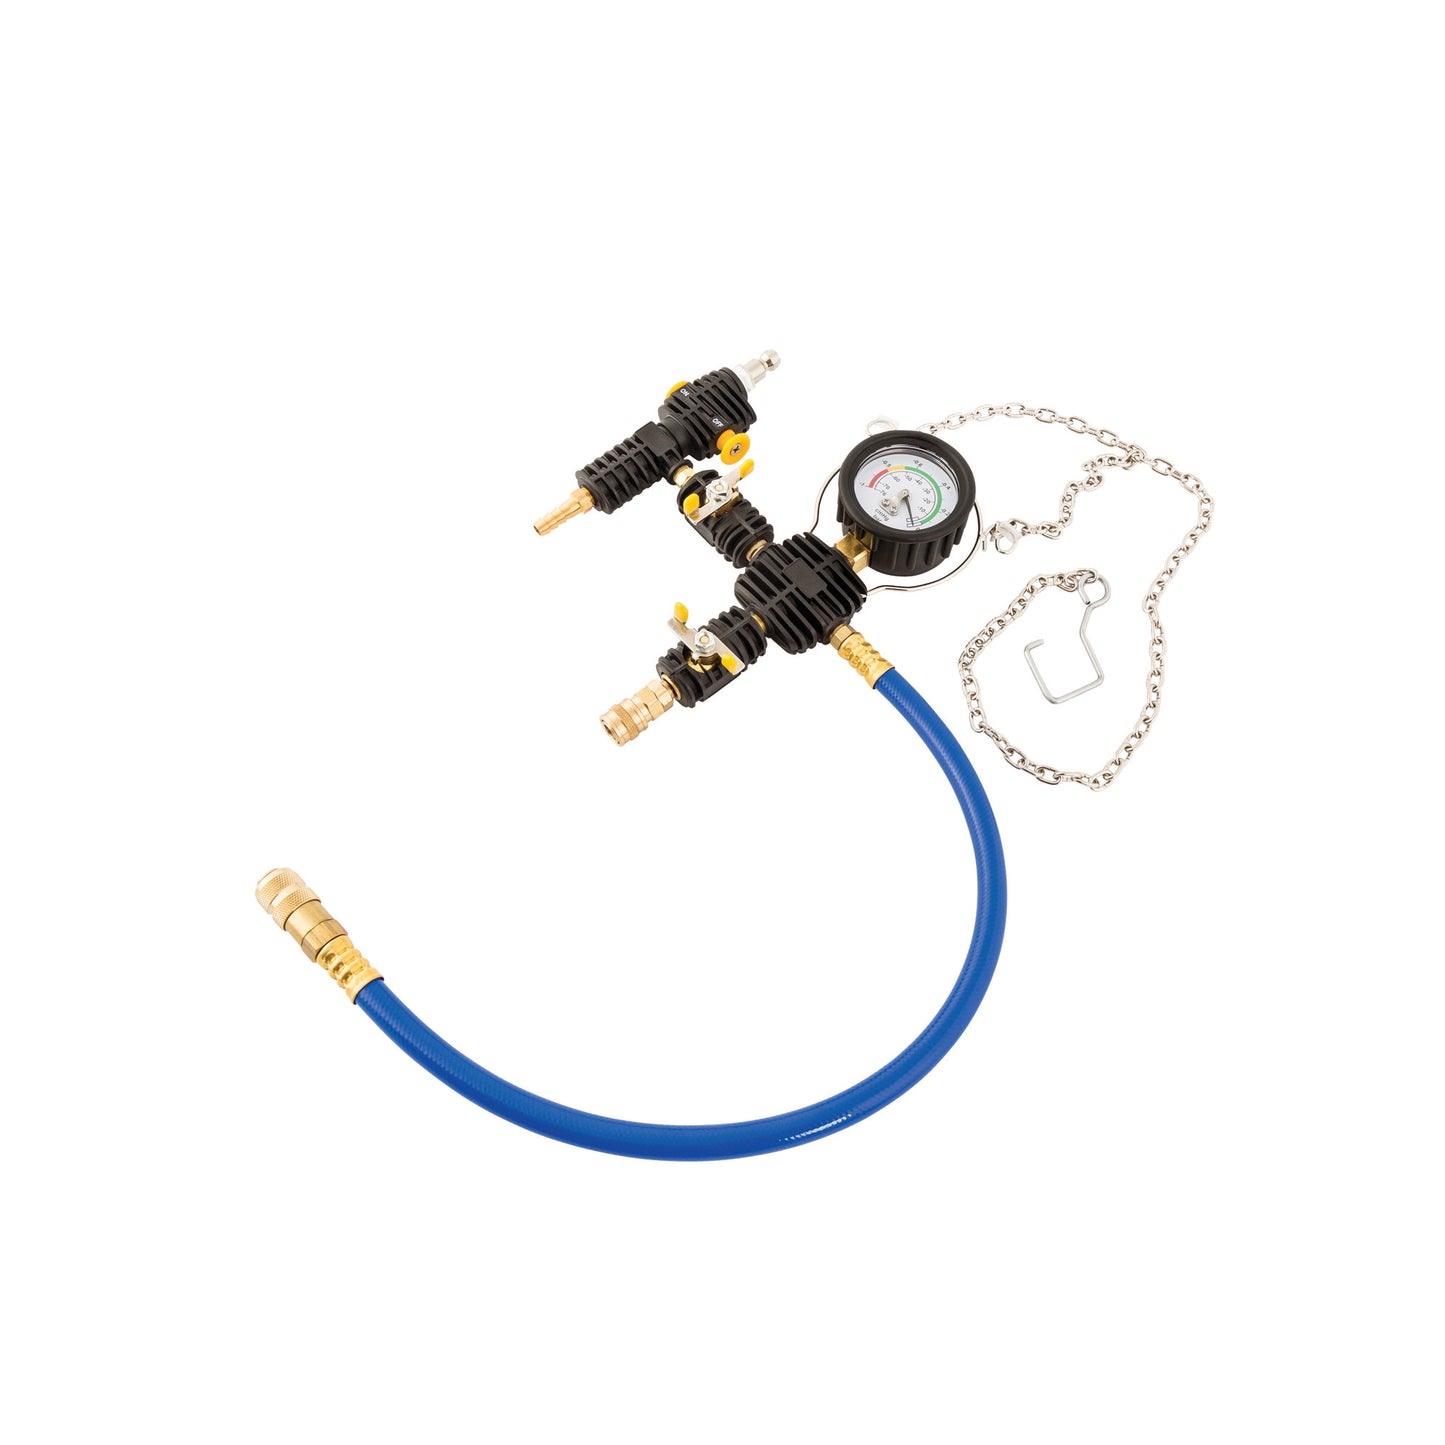 Replacement Pressure Pump and Hose Assembly for STEELMAN Cooling System Test and Purge Kit